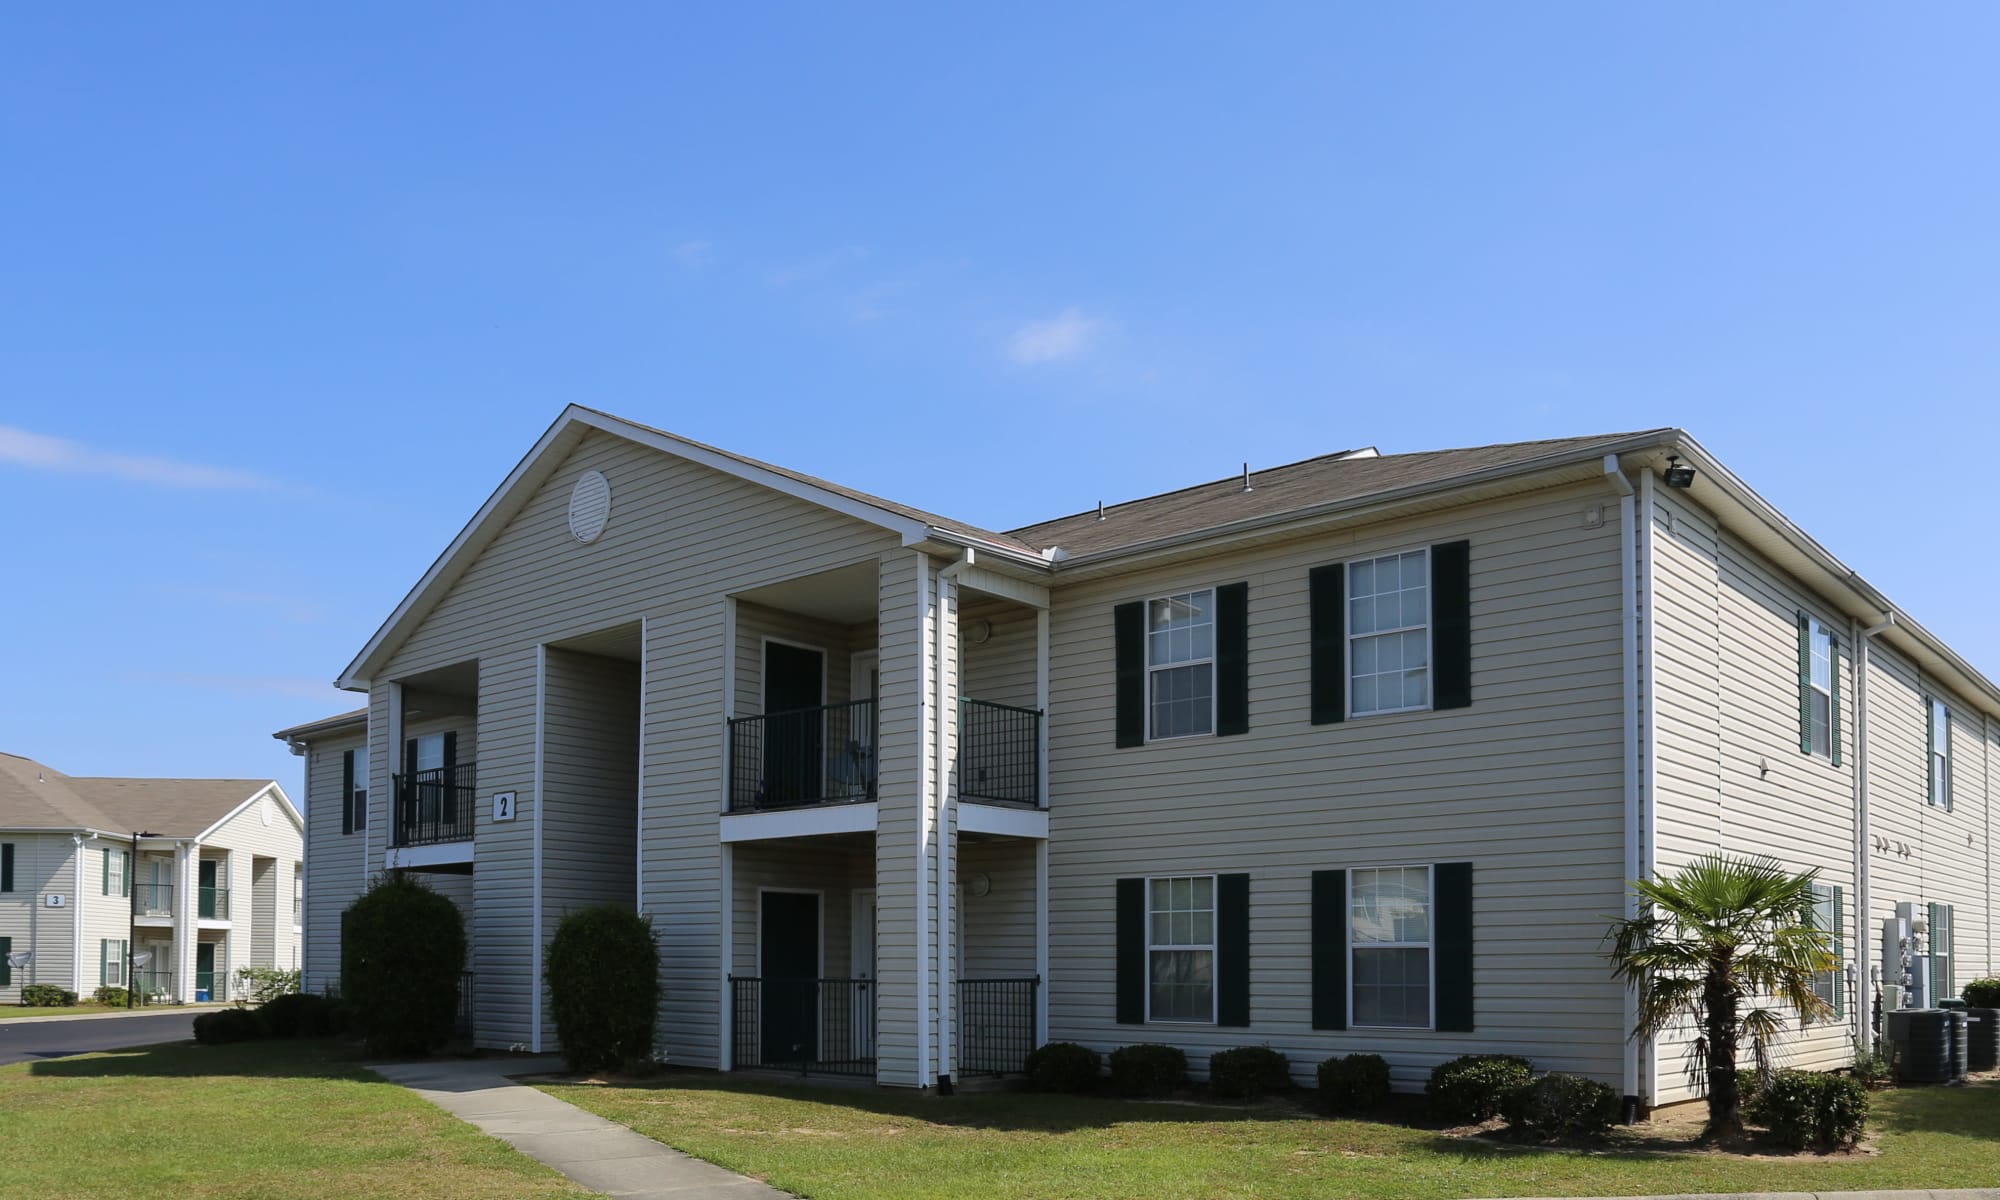 Central Gulfport Ms Apartments For Rent Ashton Park